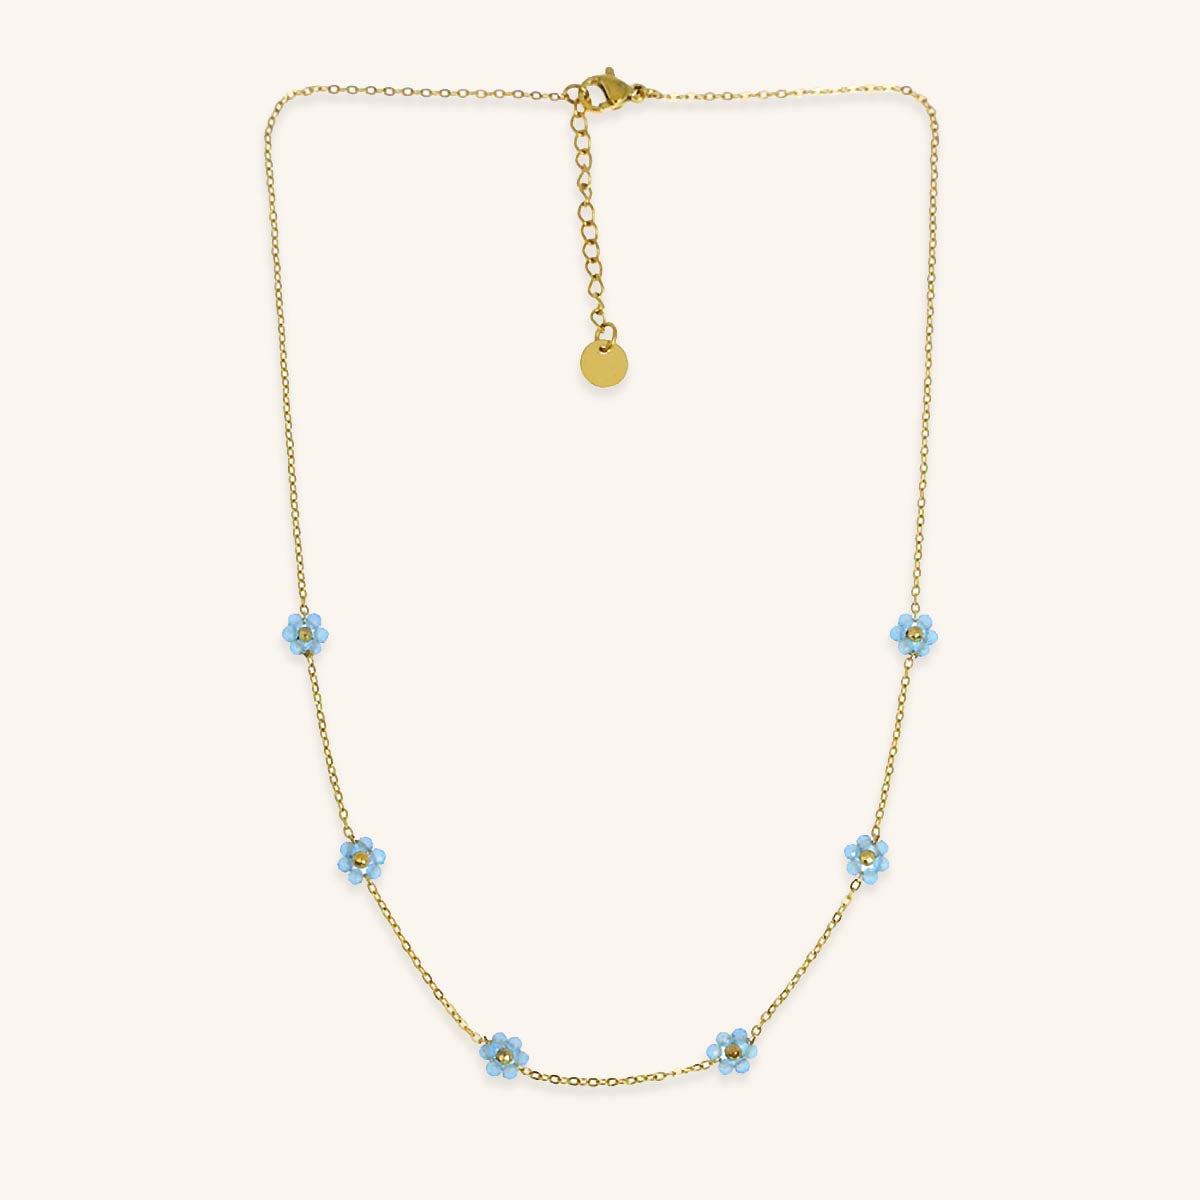 Suzanne Necklace